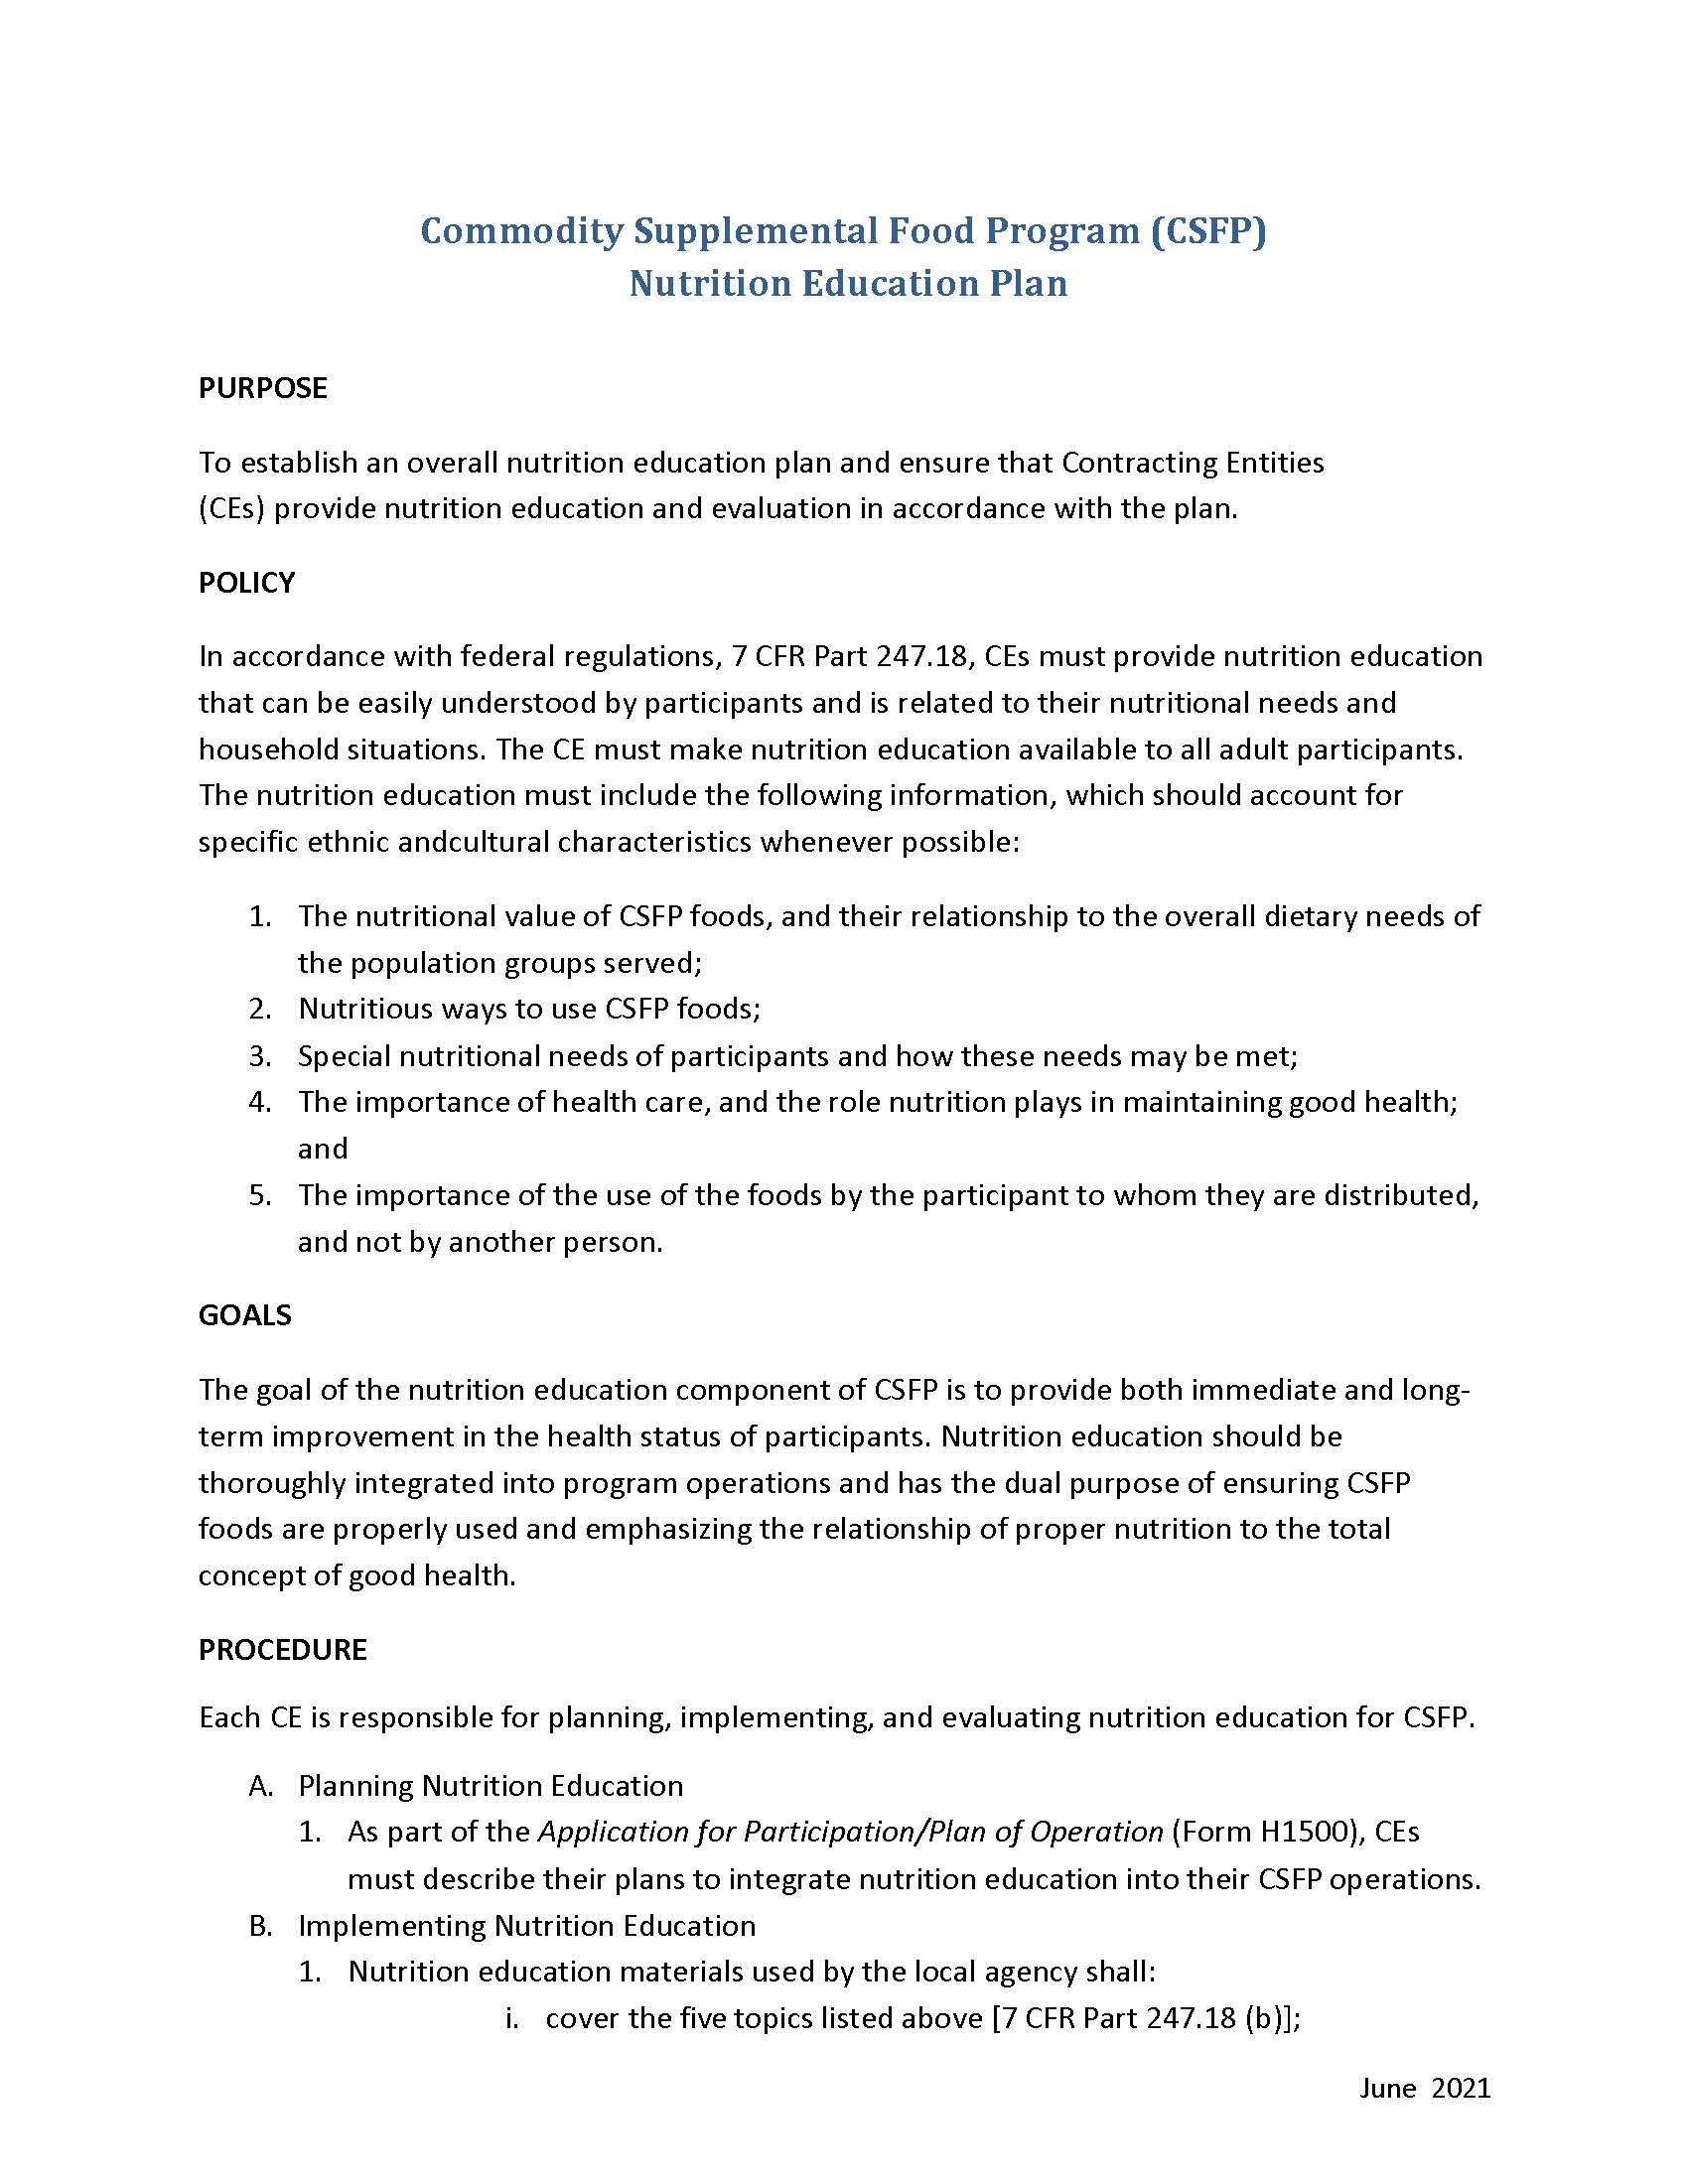 Nutrition Education Plan and Evaluation Process